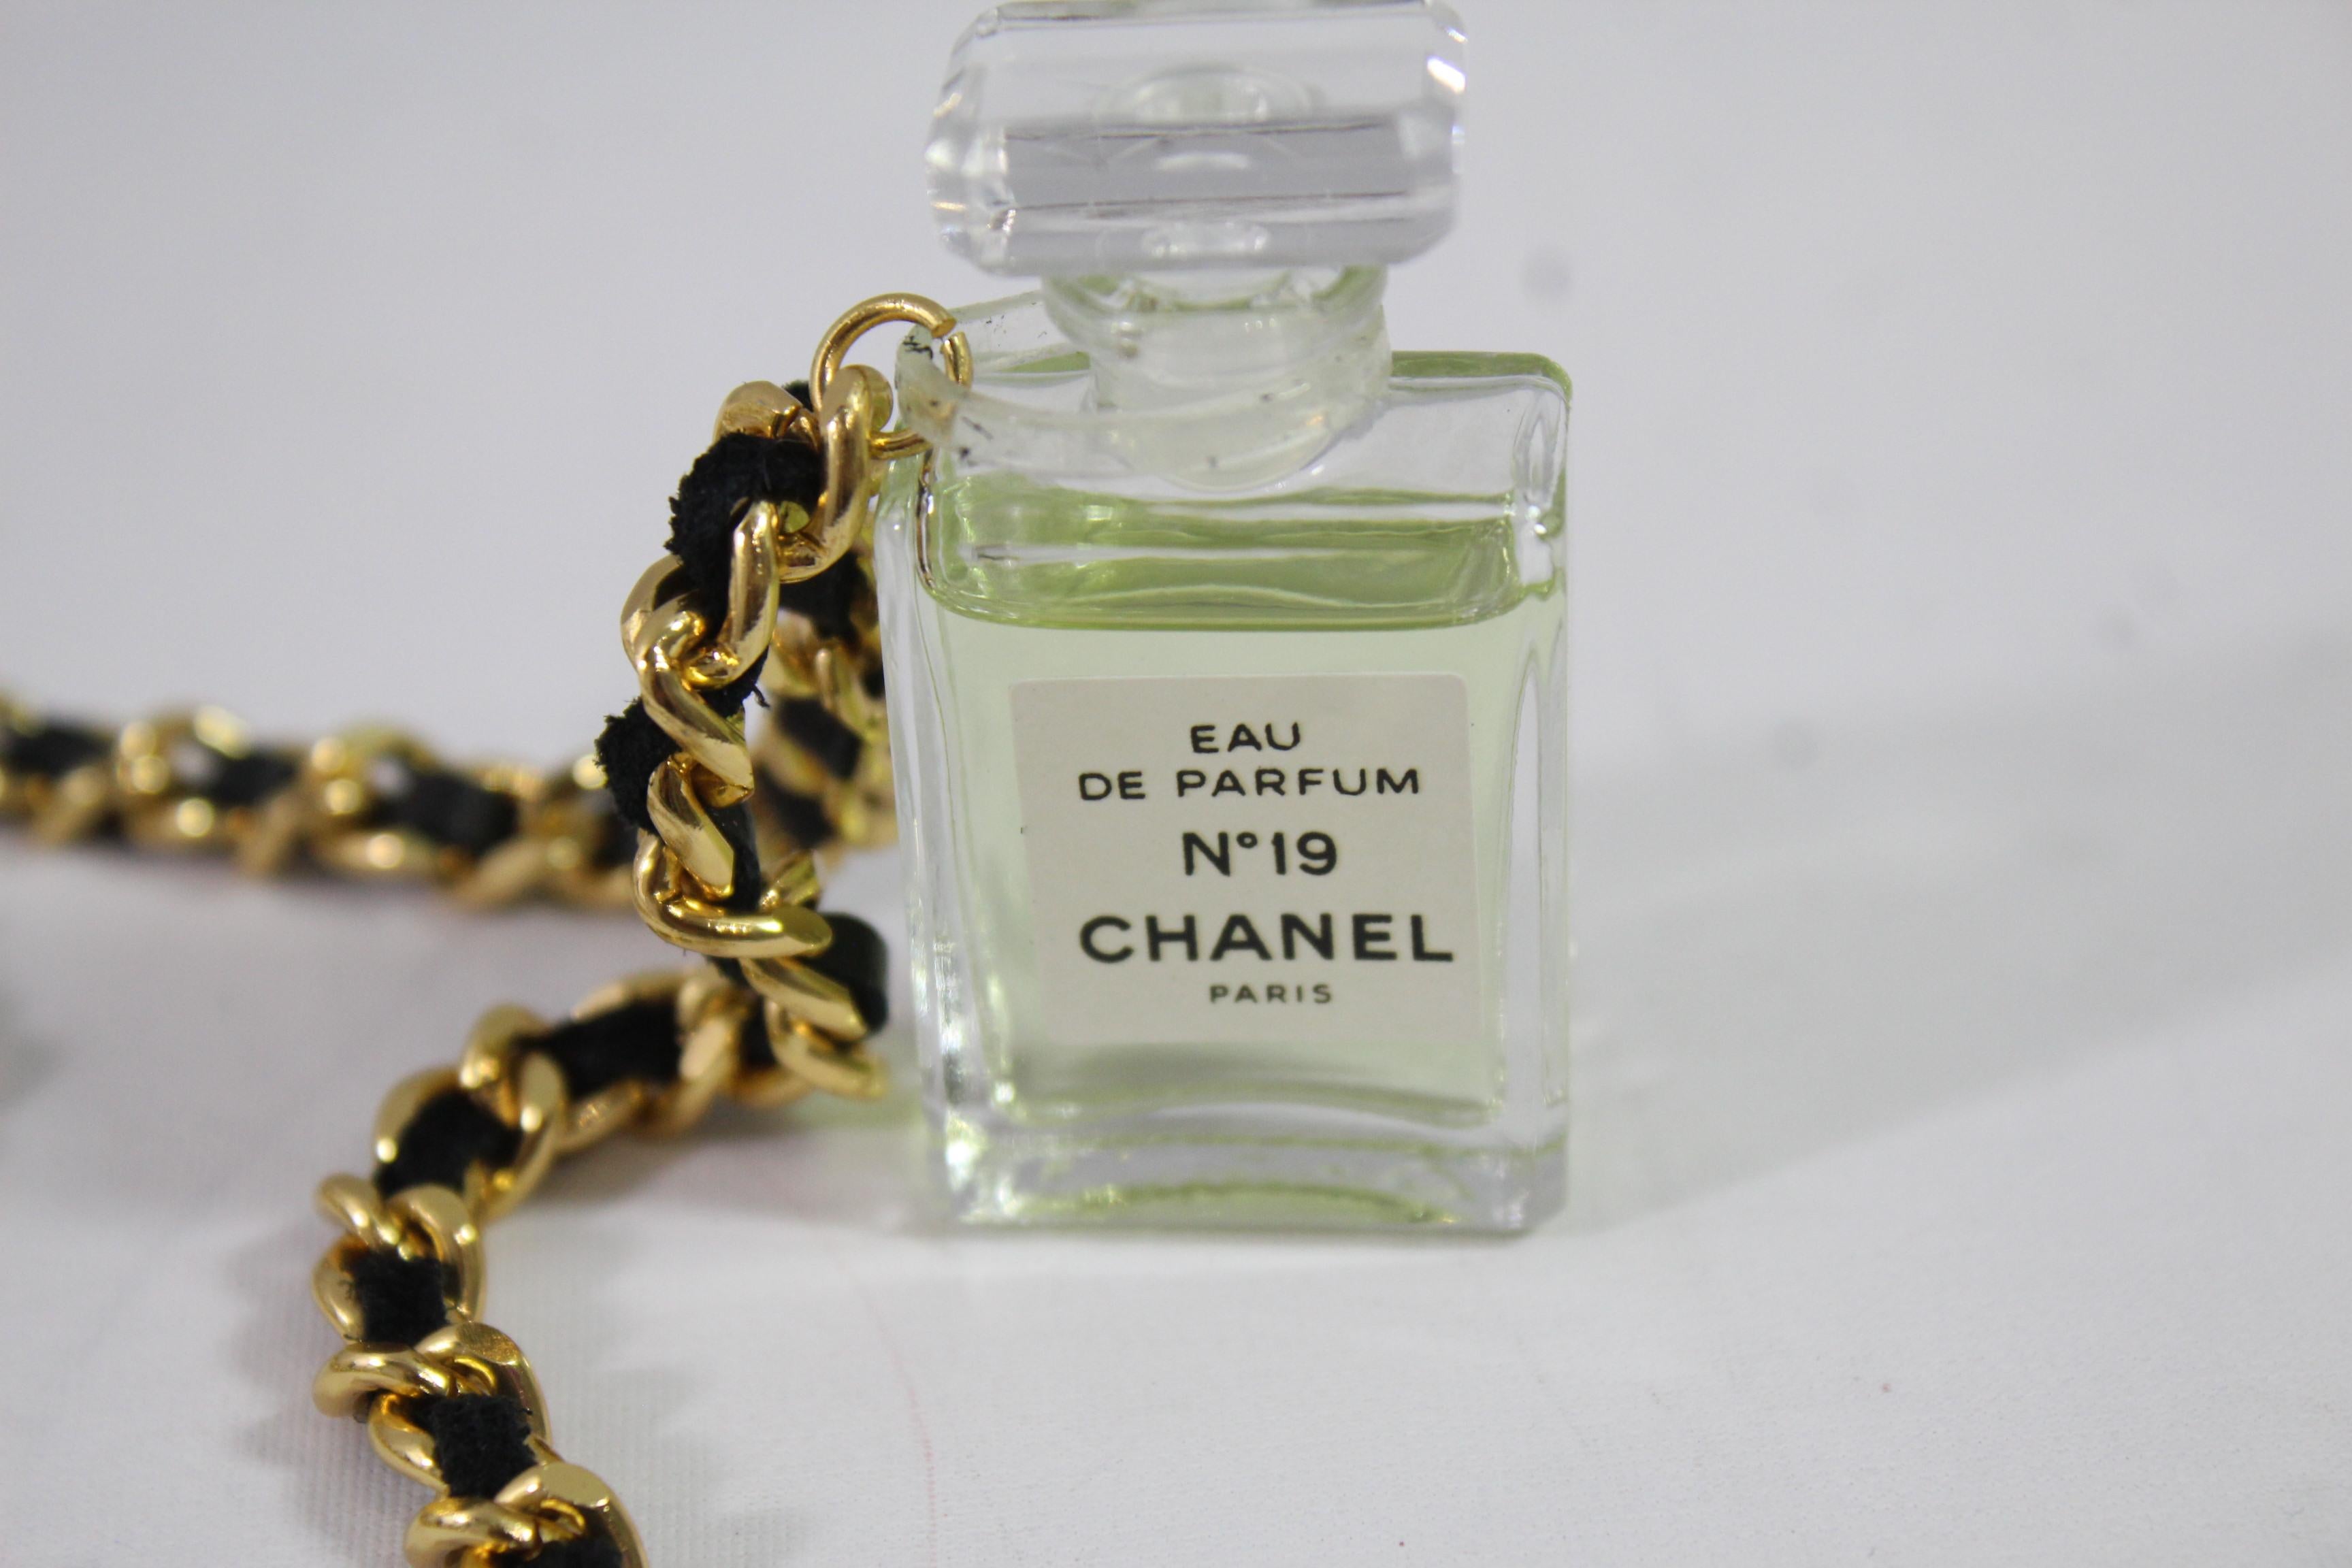 Chanel Vintage Parfum Bottle Necklace with golden chain. There is real parfum inside.

This was given as a gift to customers, so not available in the shop

Really good vintage condition

